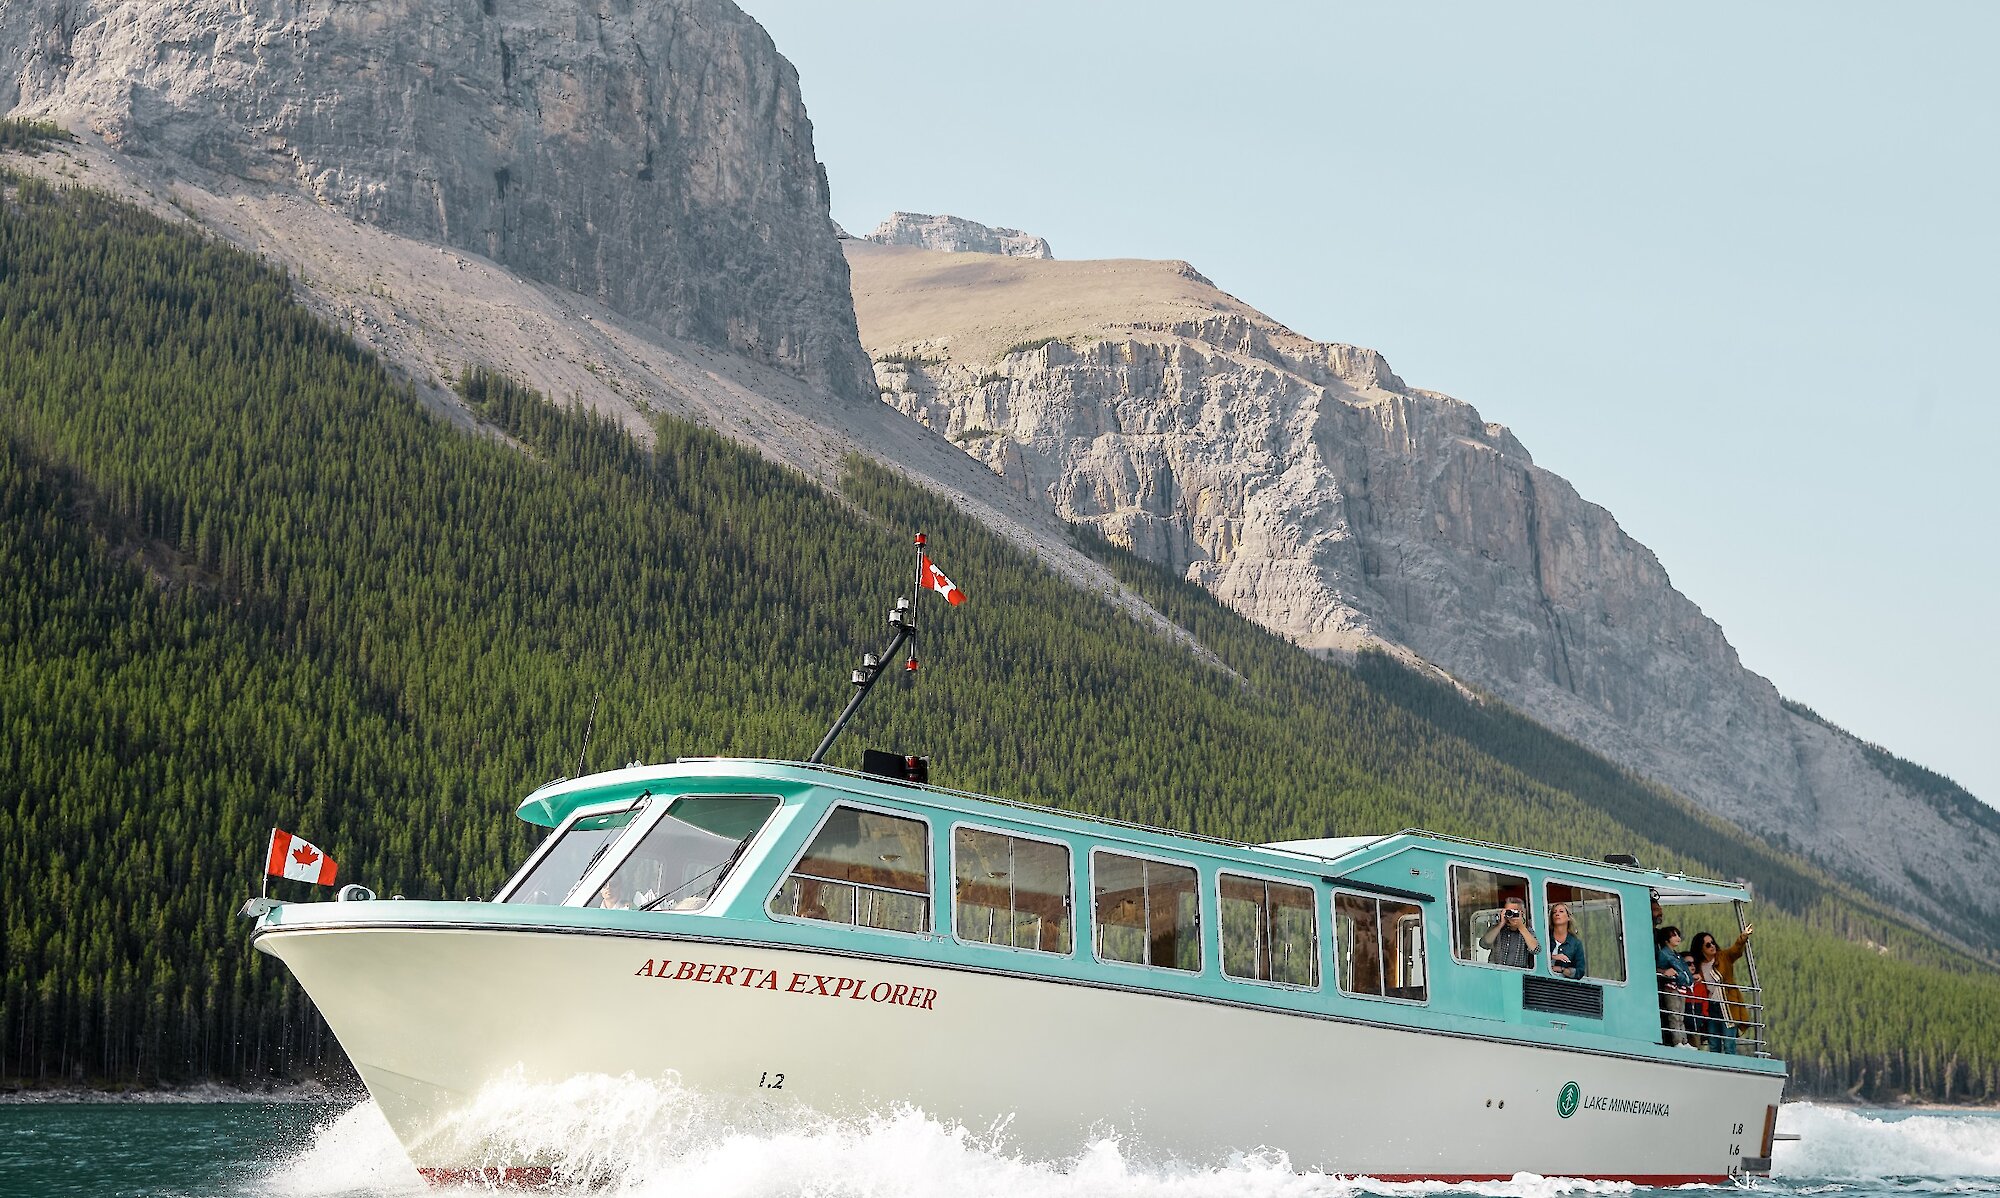 A boat cruise on Lake Minnewanka in Banff with mountains in the background